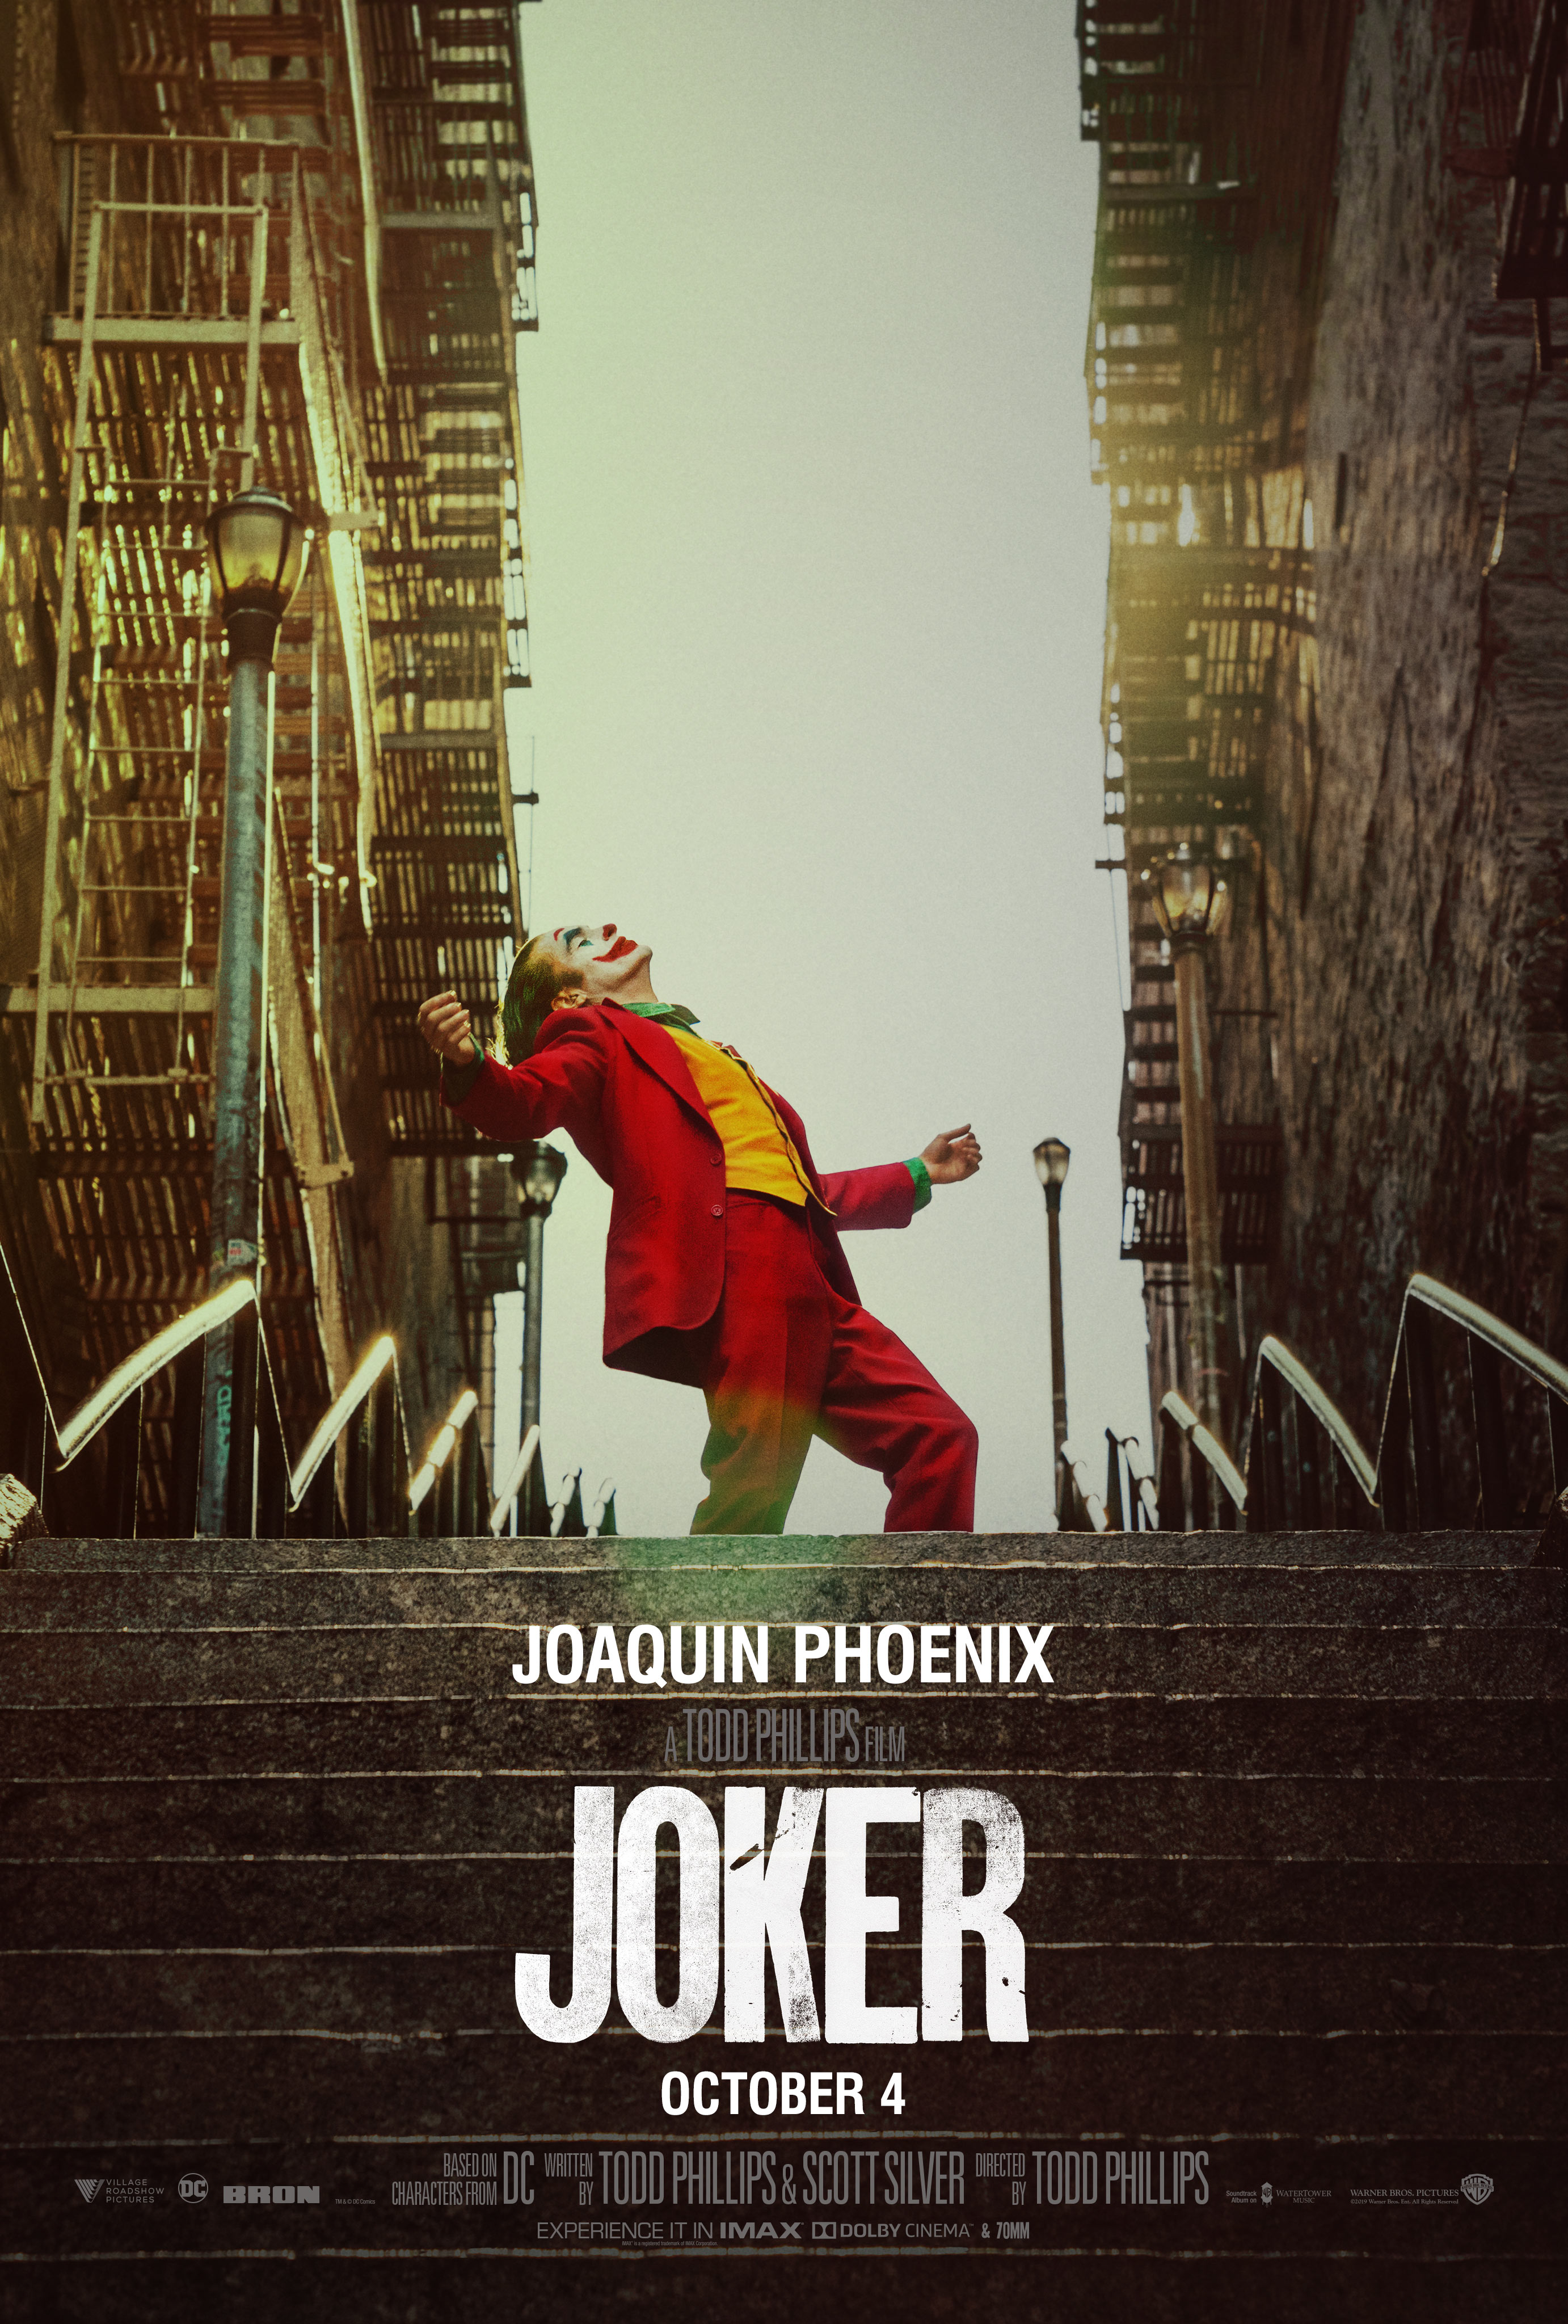 billy yeung recommends joker tamil movie download pic